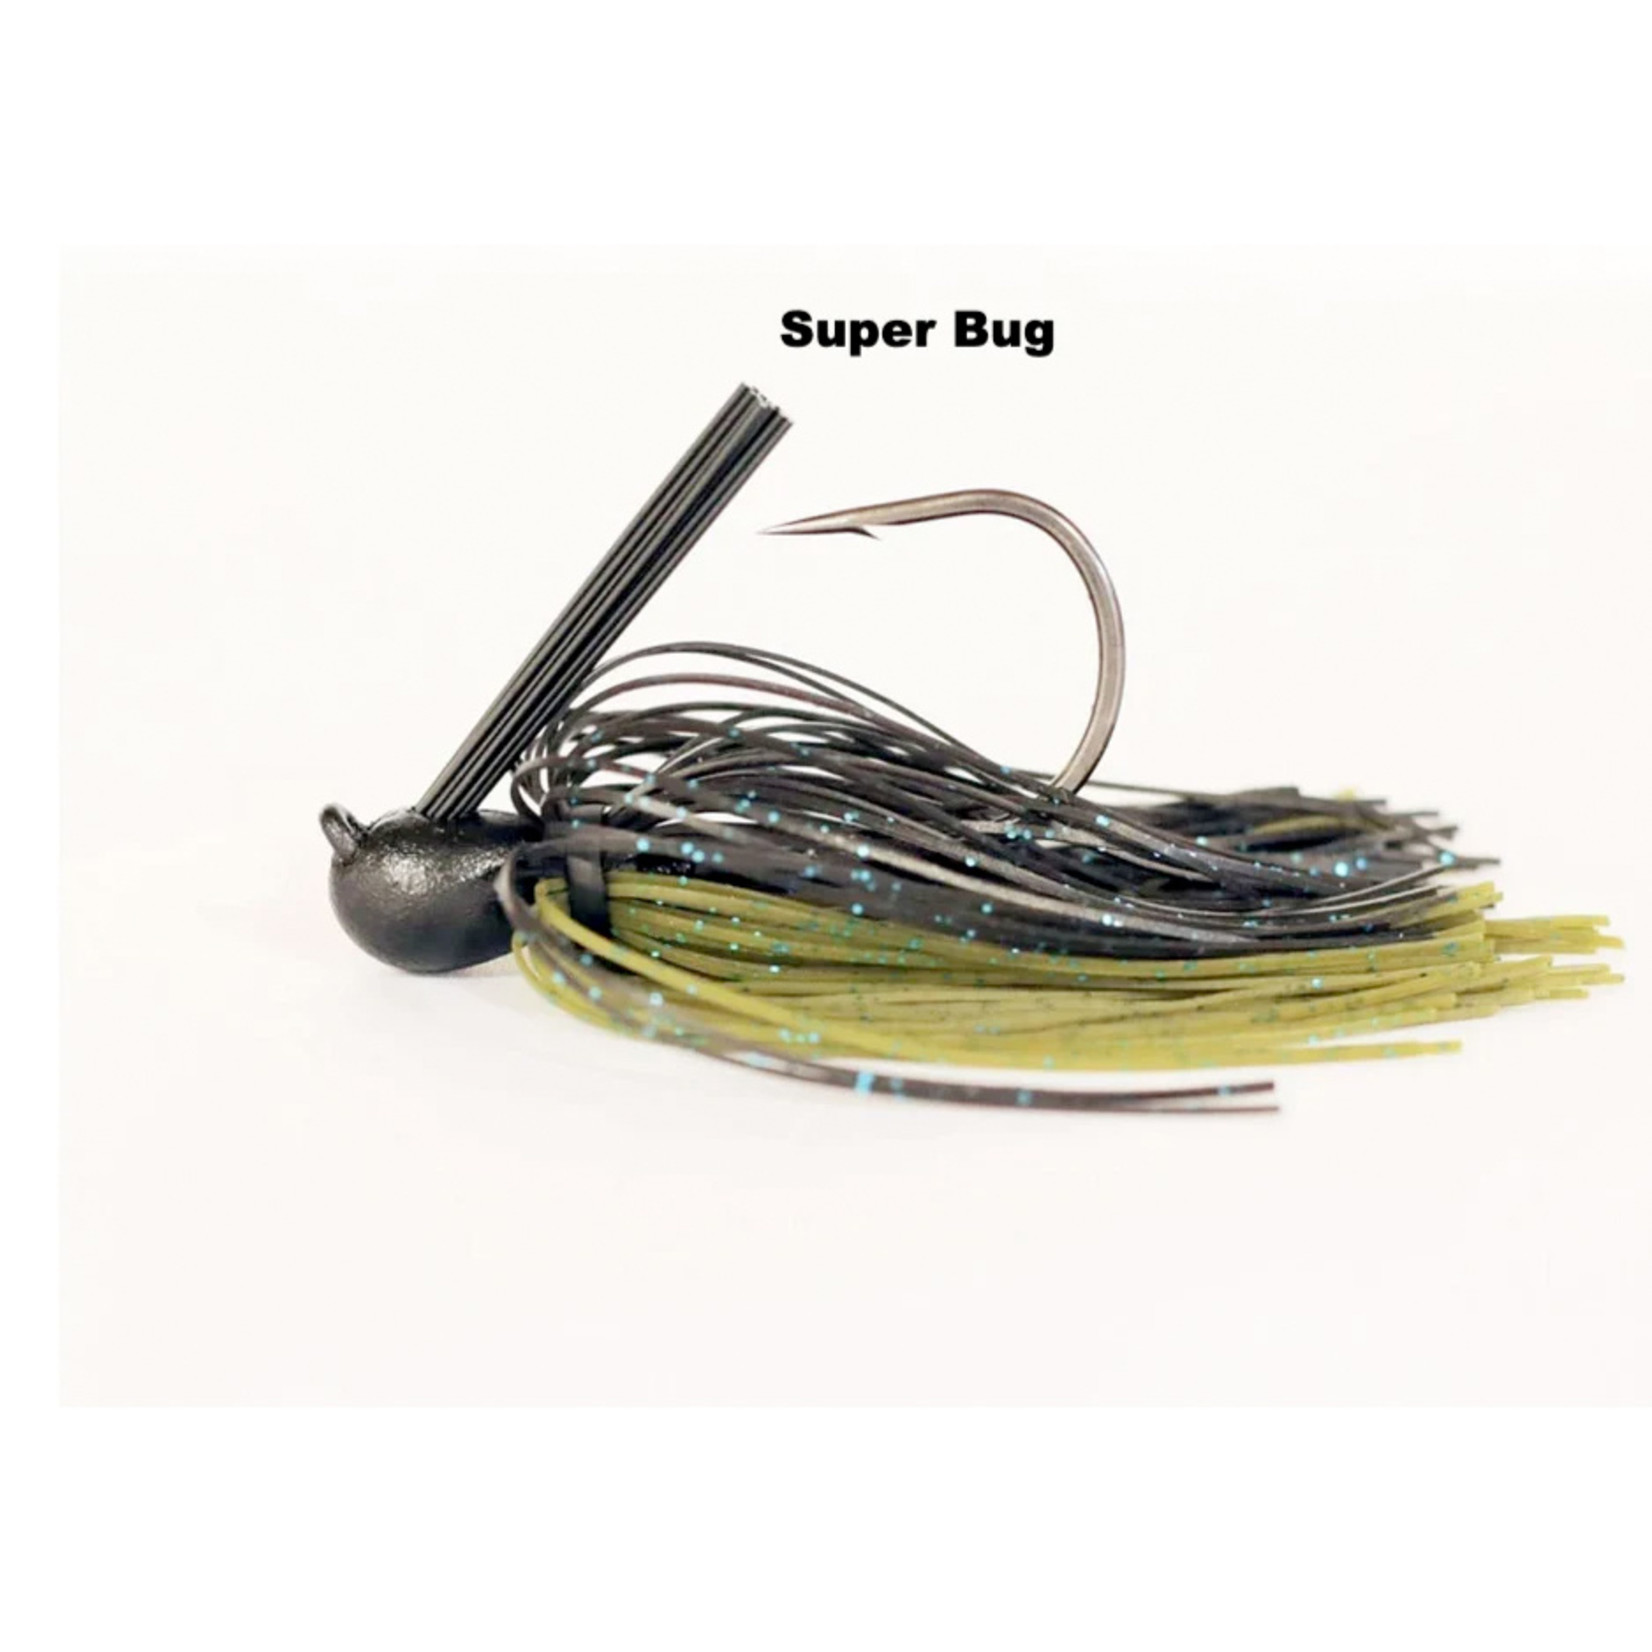 Missile Baits Ike's Flip Out Jig